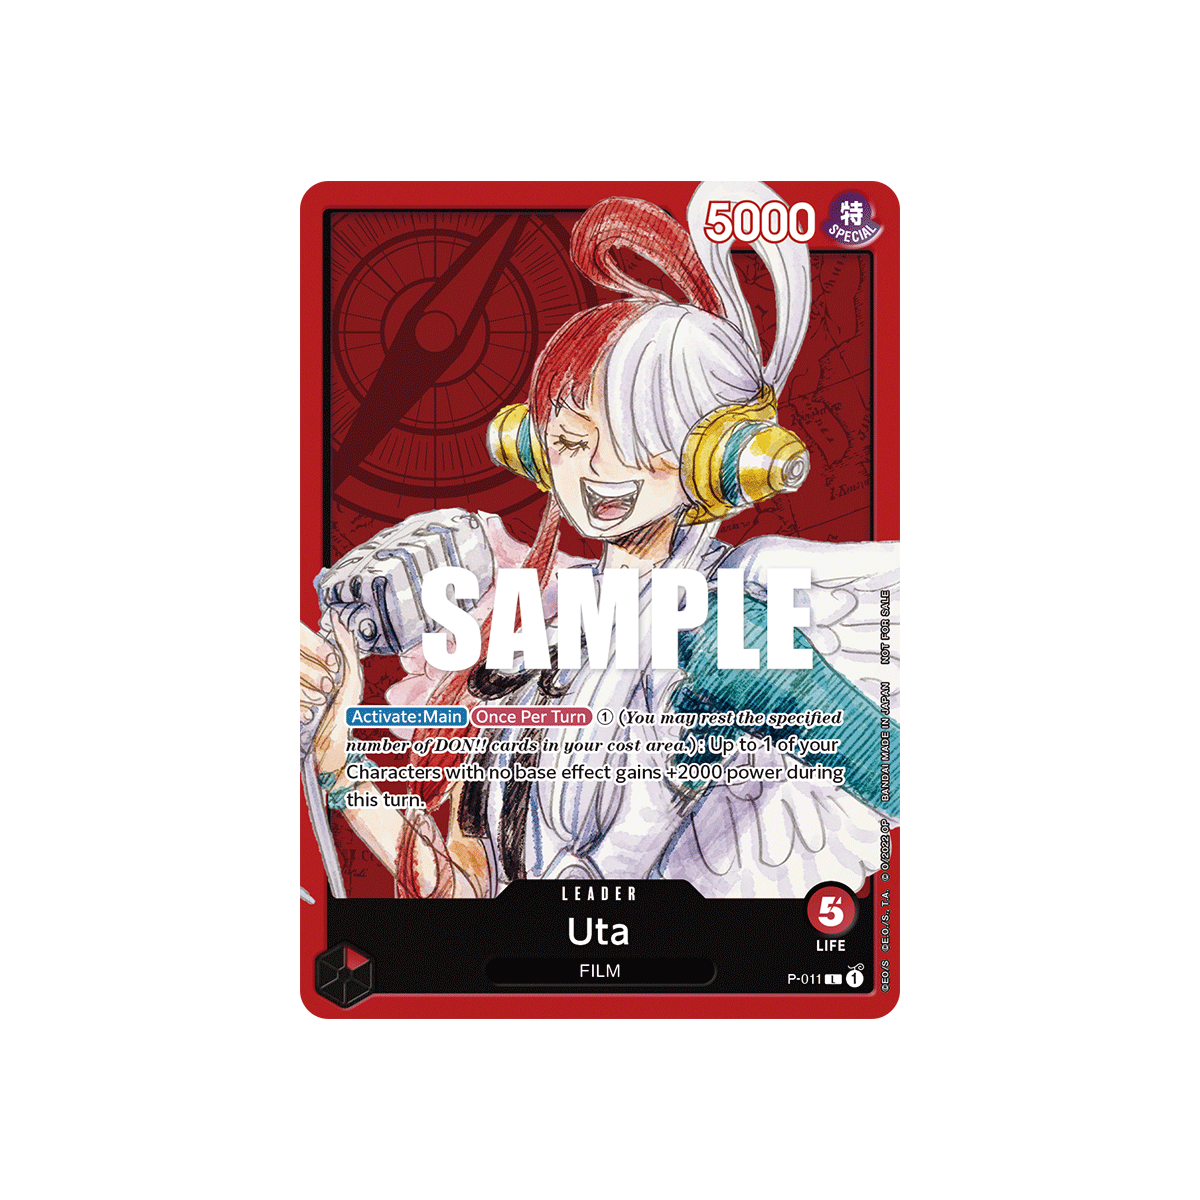 Uta: Carte One Piece Included in FILM RED Promotion Card Set N°P-011